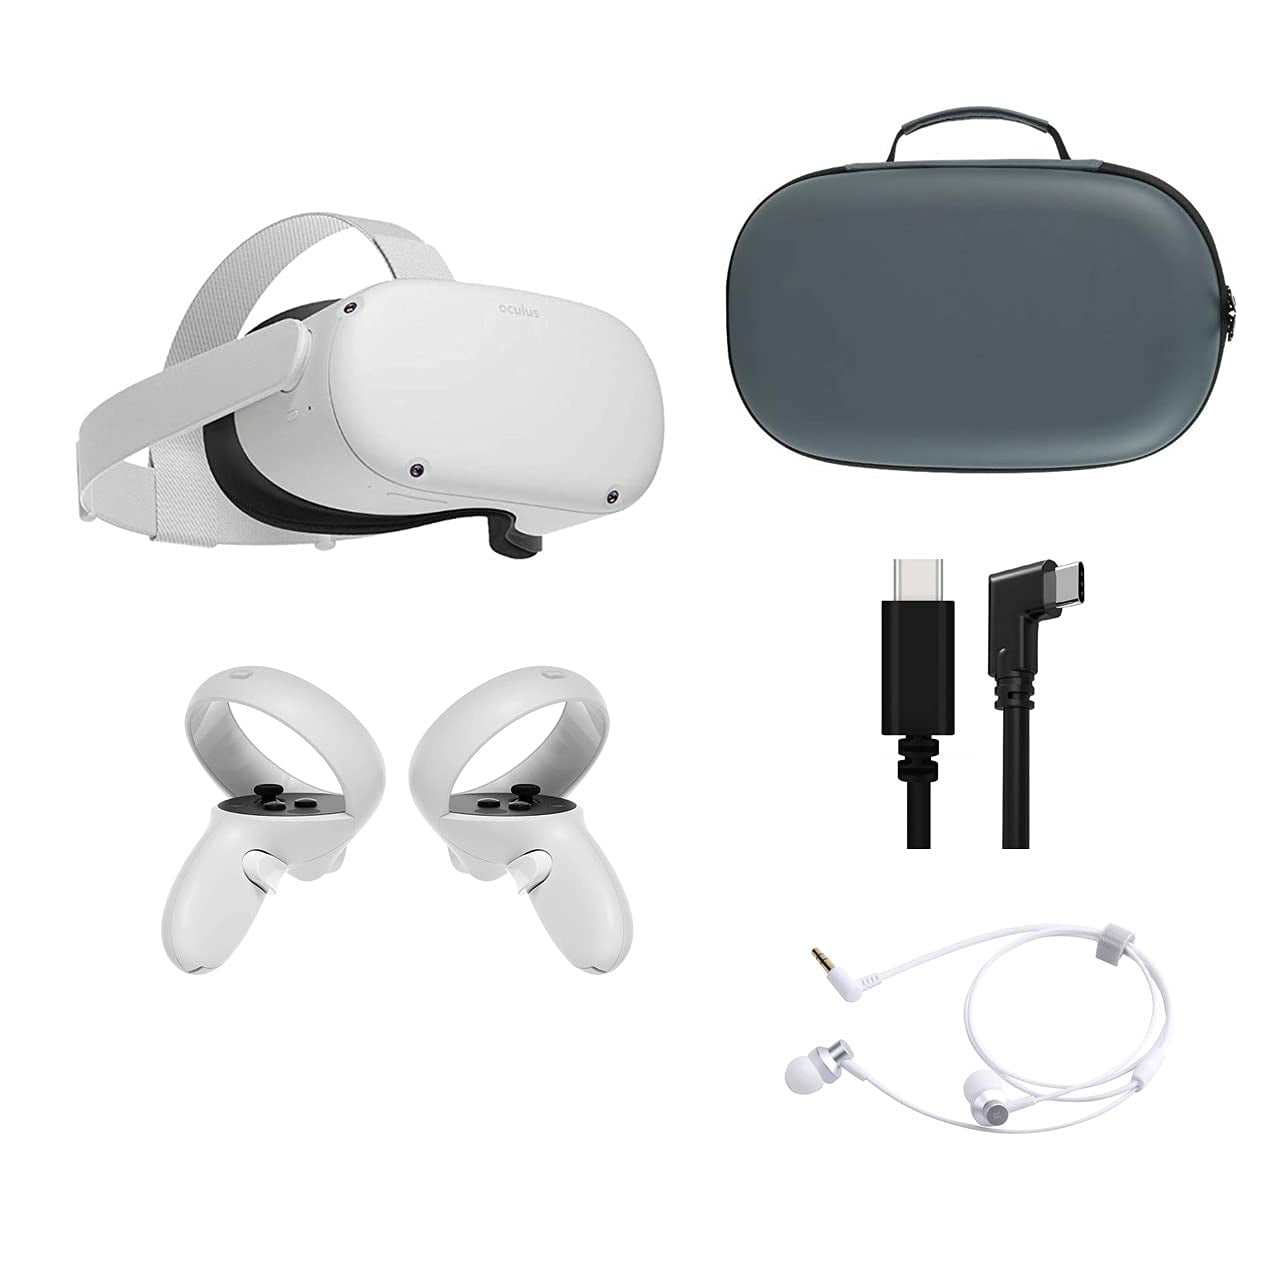 2021 Meta Oculus Quest 2 All-In-One VR Headset 128GB, Touch Controllers,  1832x1920 up to 90 Hz Refresh Rate LCD, 3D Audio, Mytrix Carrying Case, 